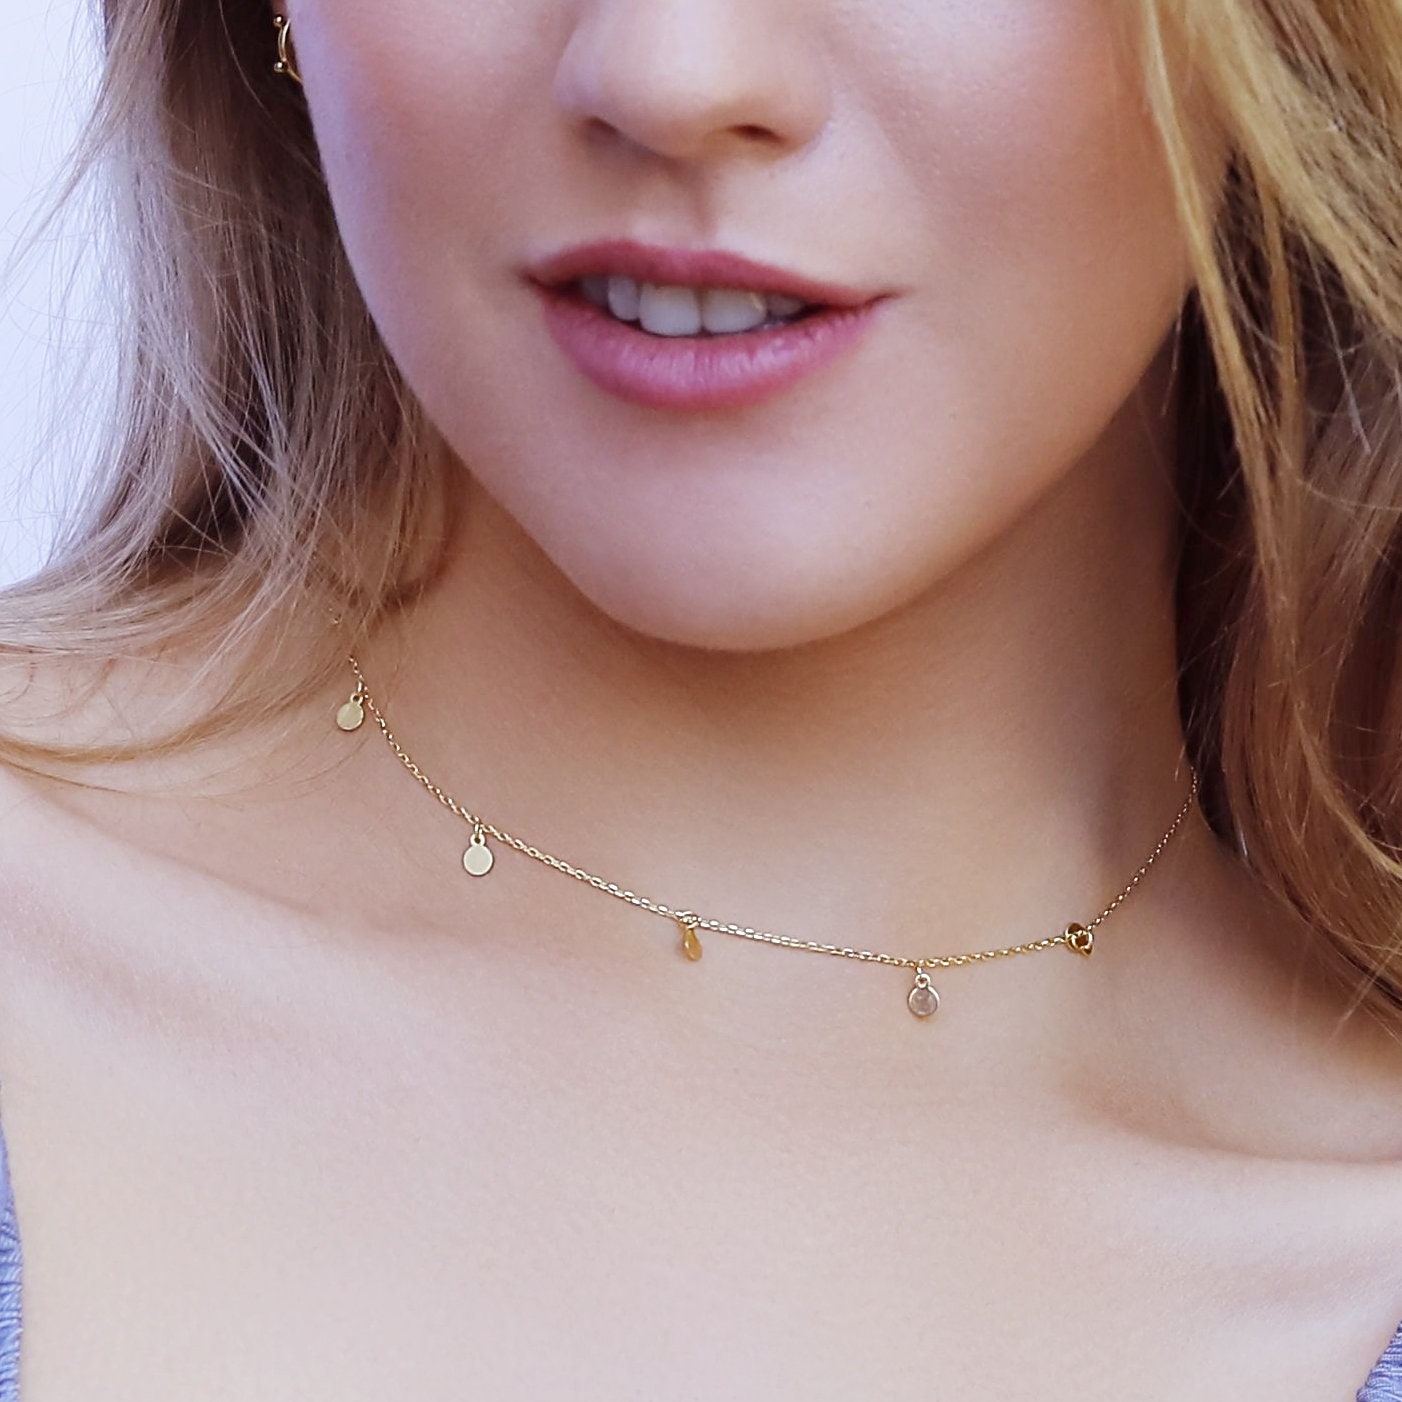 Amanda - Gold Disc Necklace - Dainty Coin Necklace - Gold Coin Choker - Small Disc Necklace